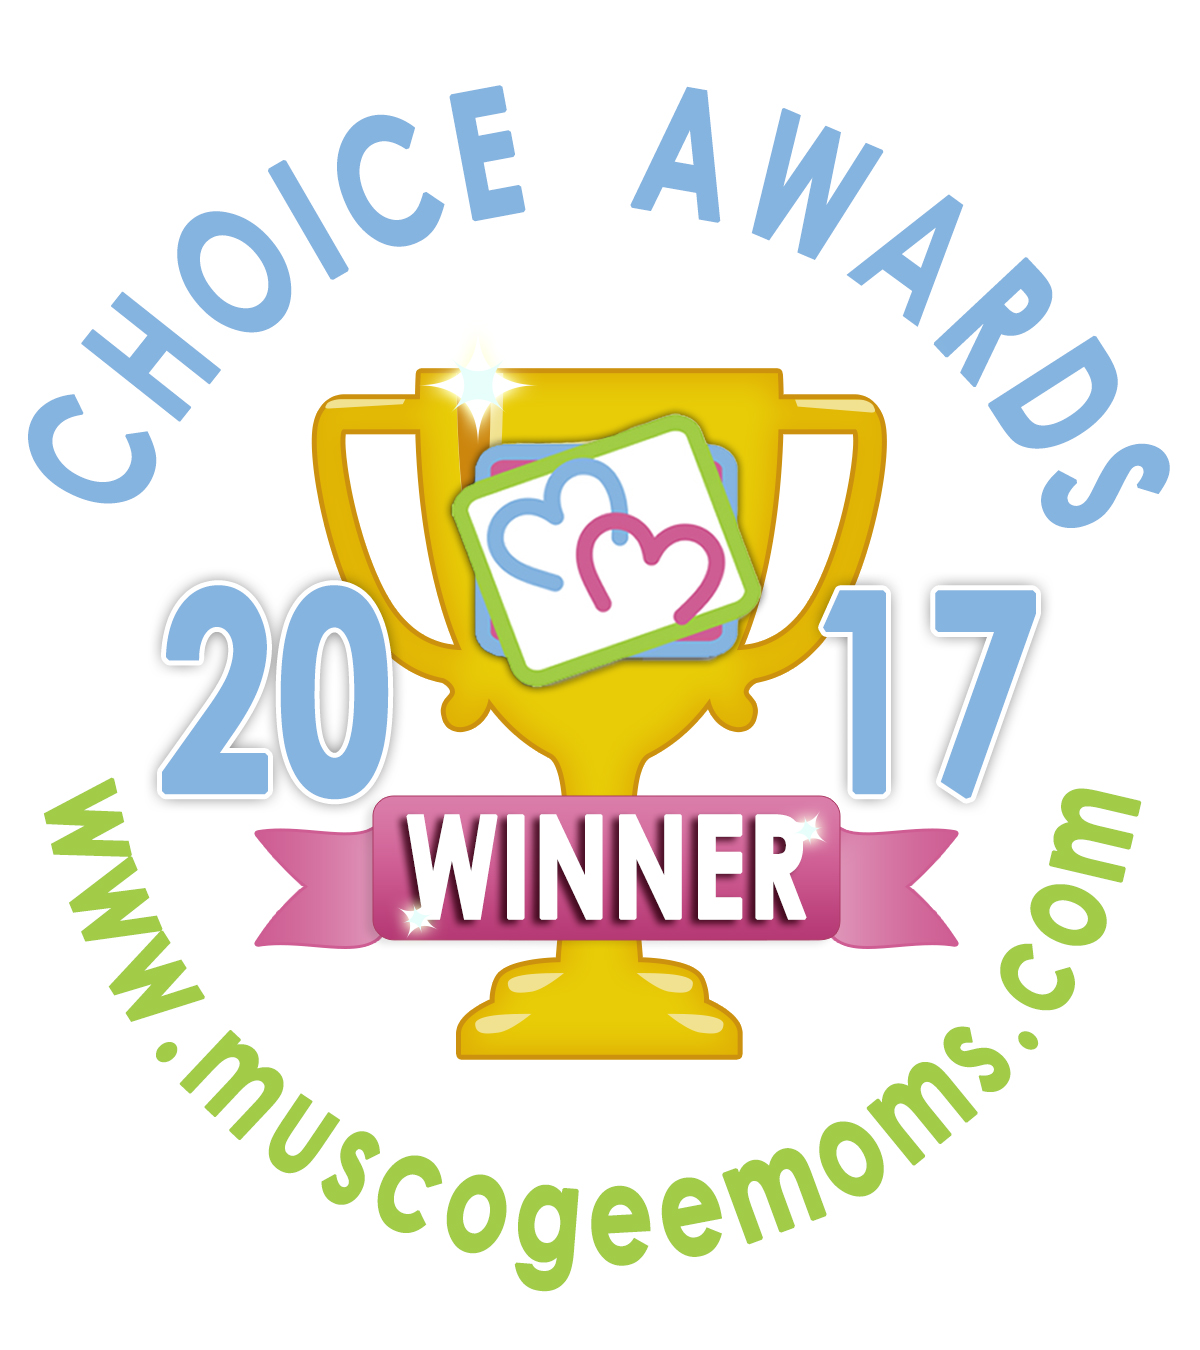 Welcome to the 2017 Choice Awards